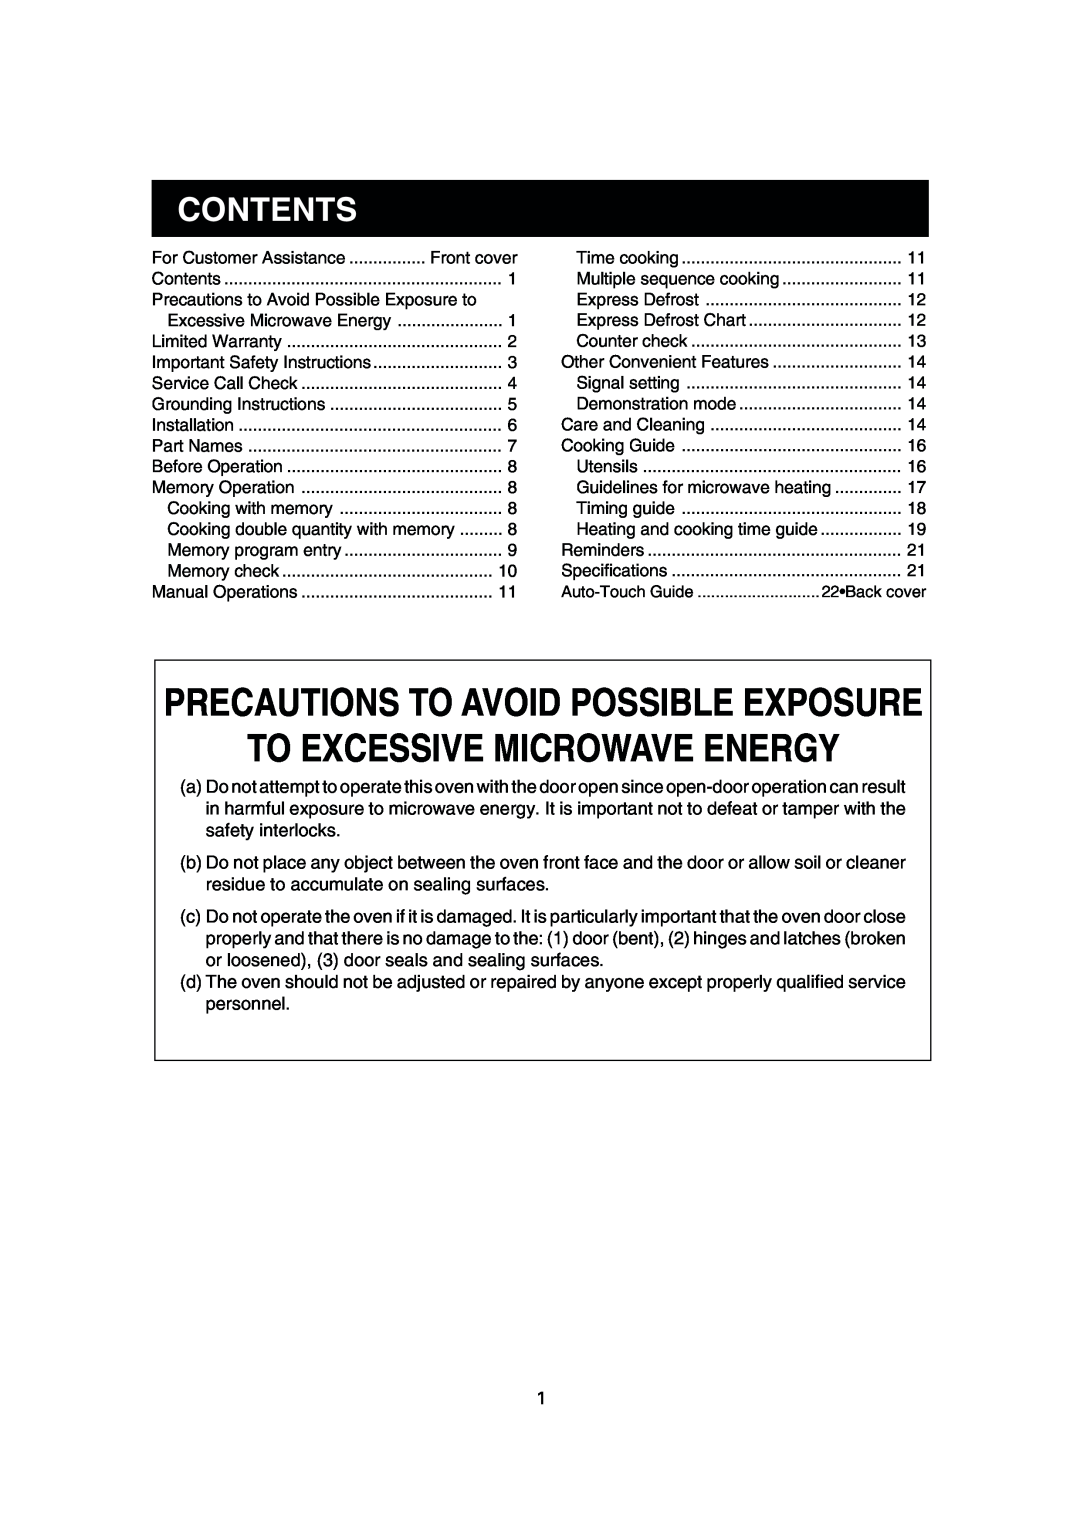 Sharp R-25JT, R-22GT, R-24GT, R-23GT To Excessive Microwave Energy, Precautions To Avoid Possible Exposure, Contents 